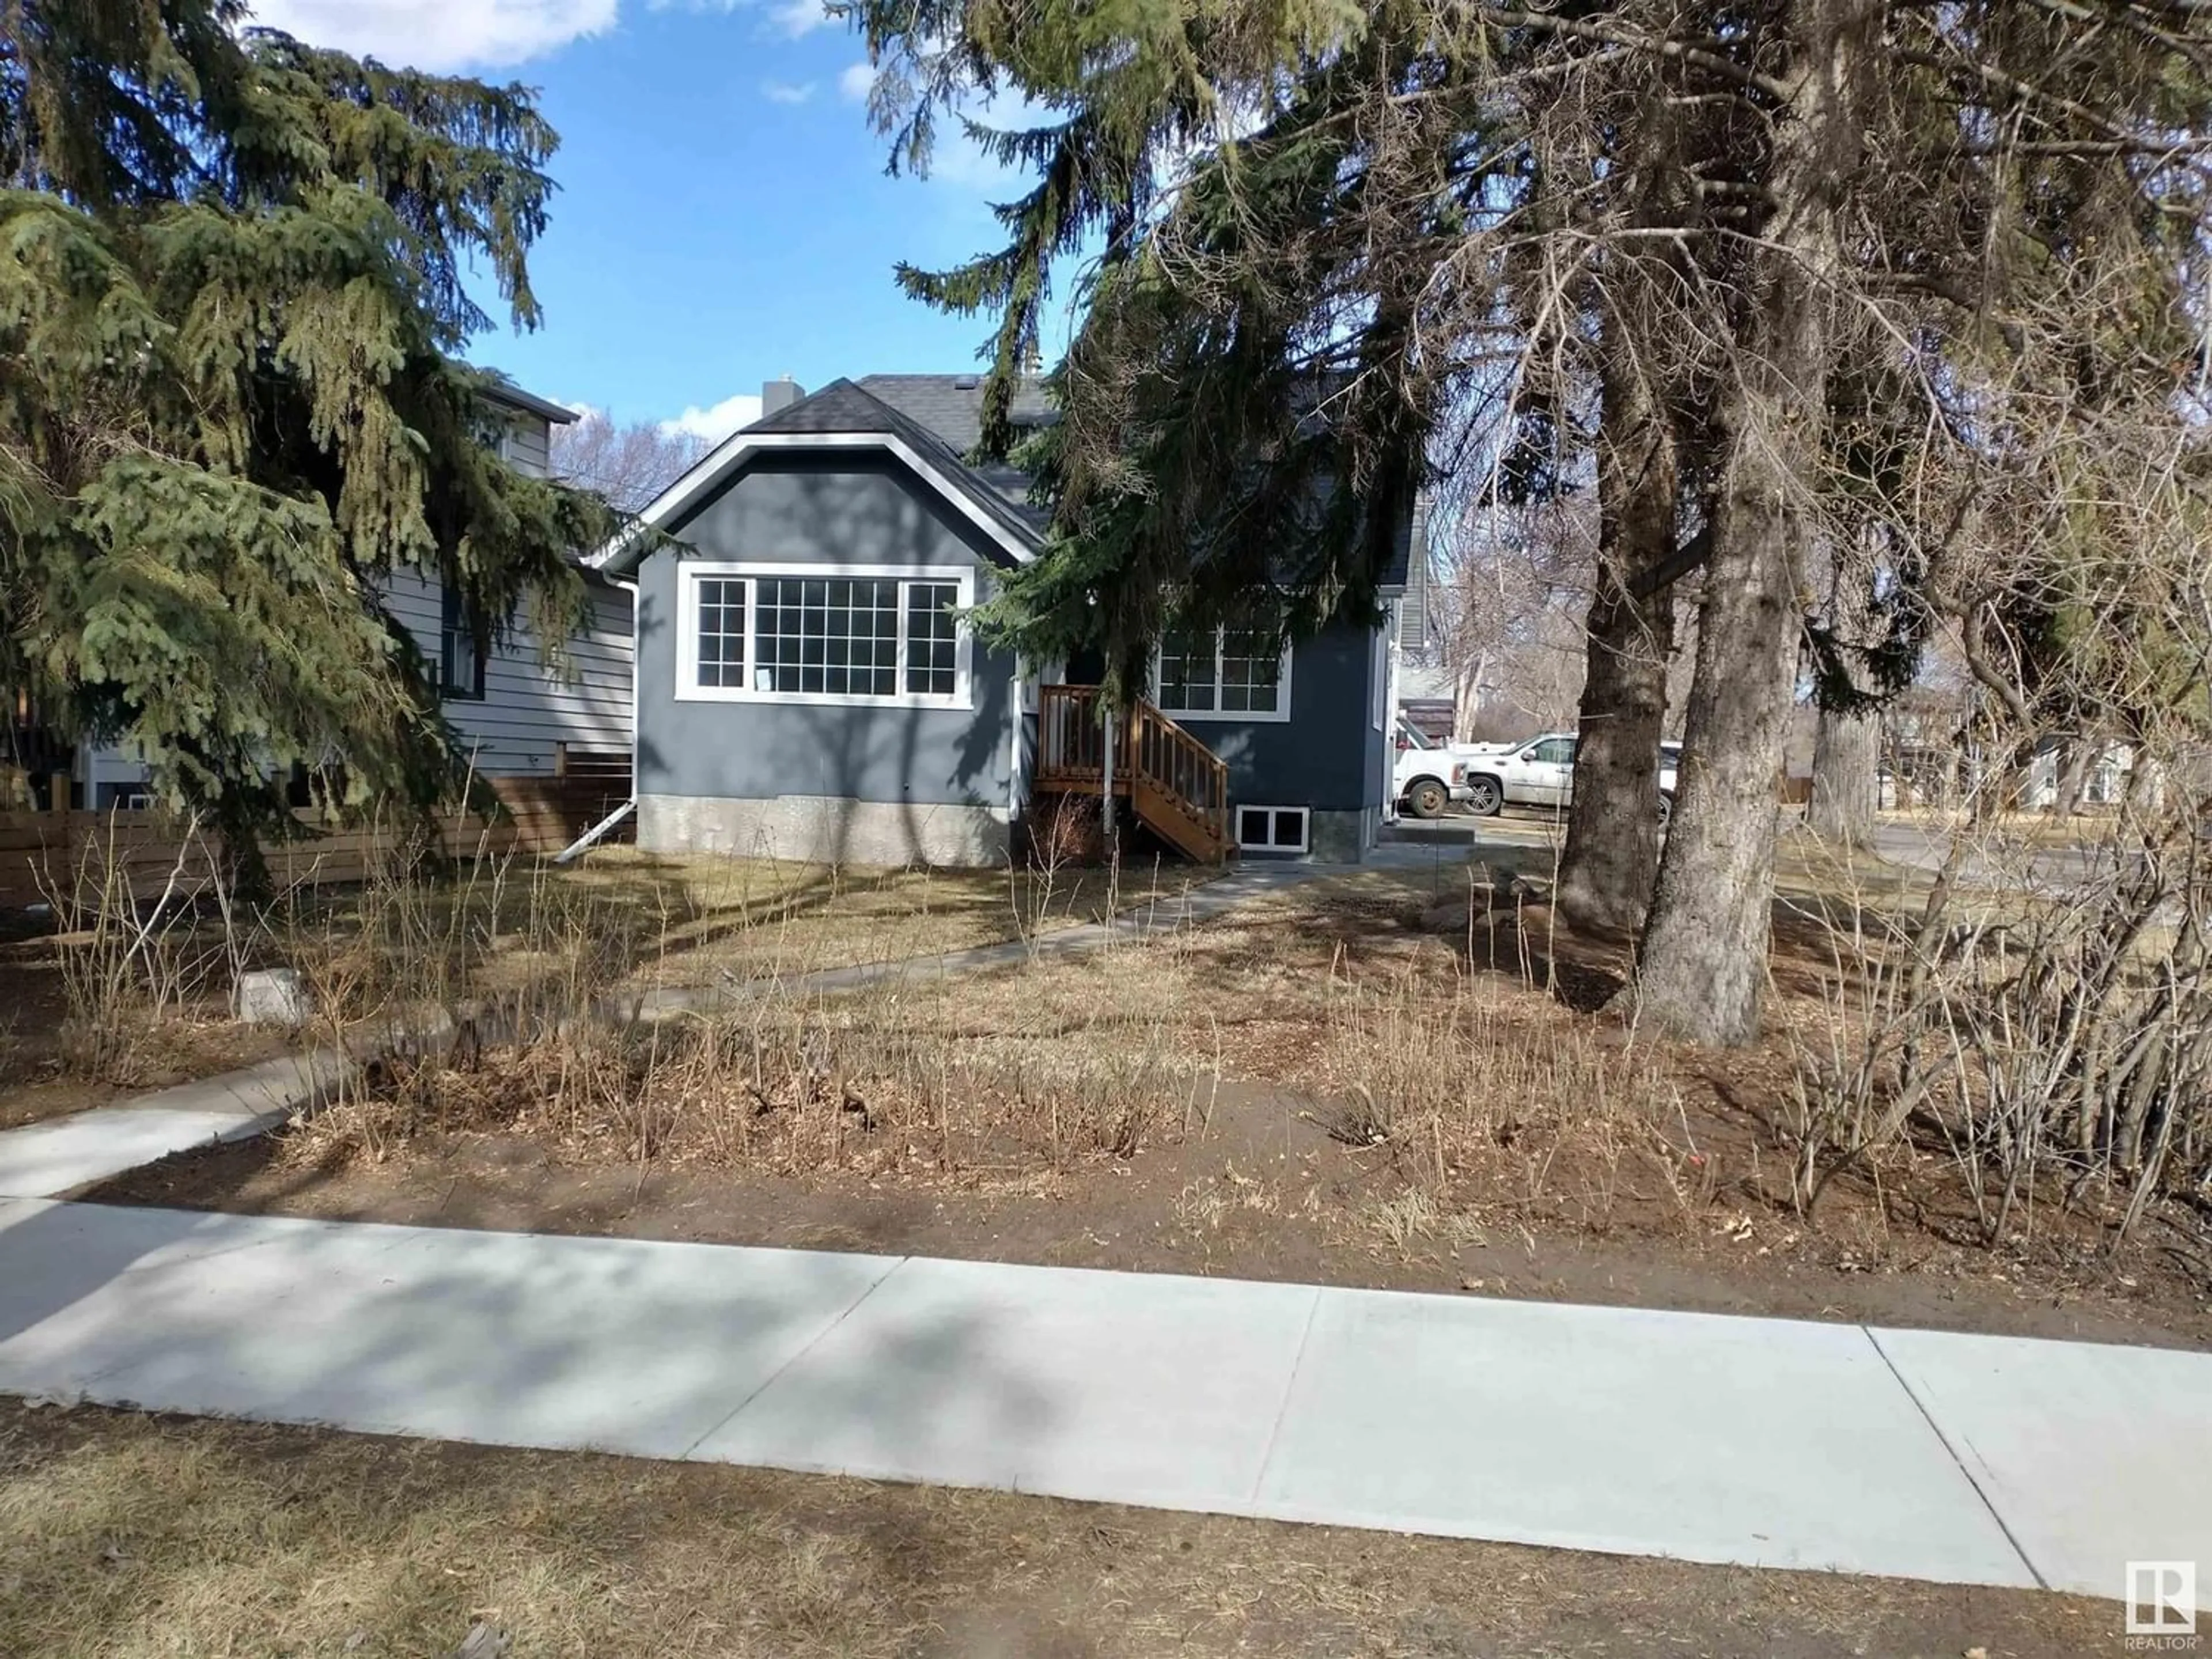 Frontside or backside of a home for 11503 66 ST NW, Edmonton Alberta T5B1J1